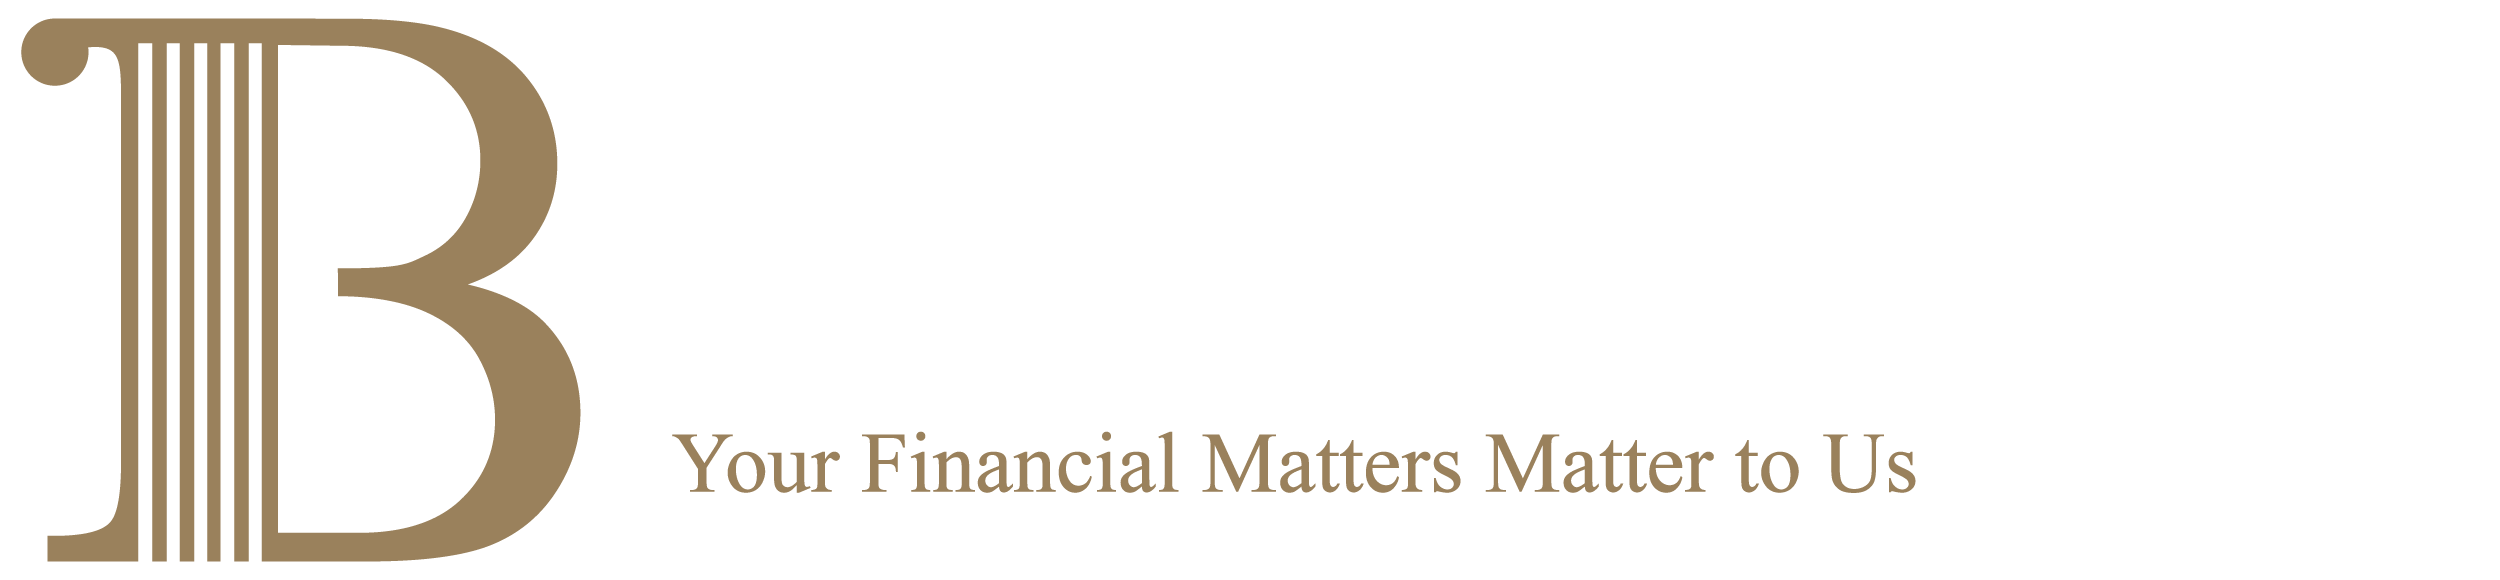 The Law Offices of Bryan Yaldou, PLLC | Unpaid Wages - Bankruptcy - Personal Injury